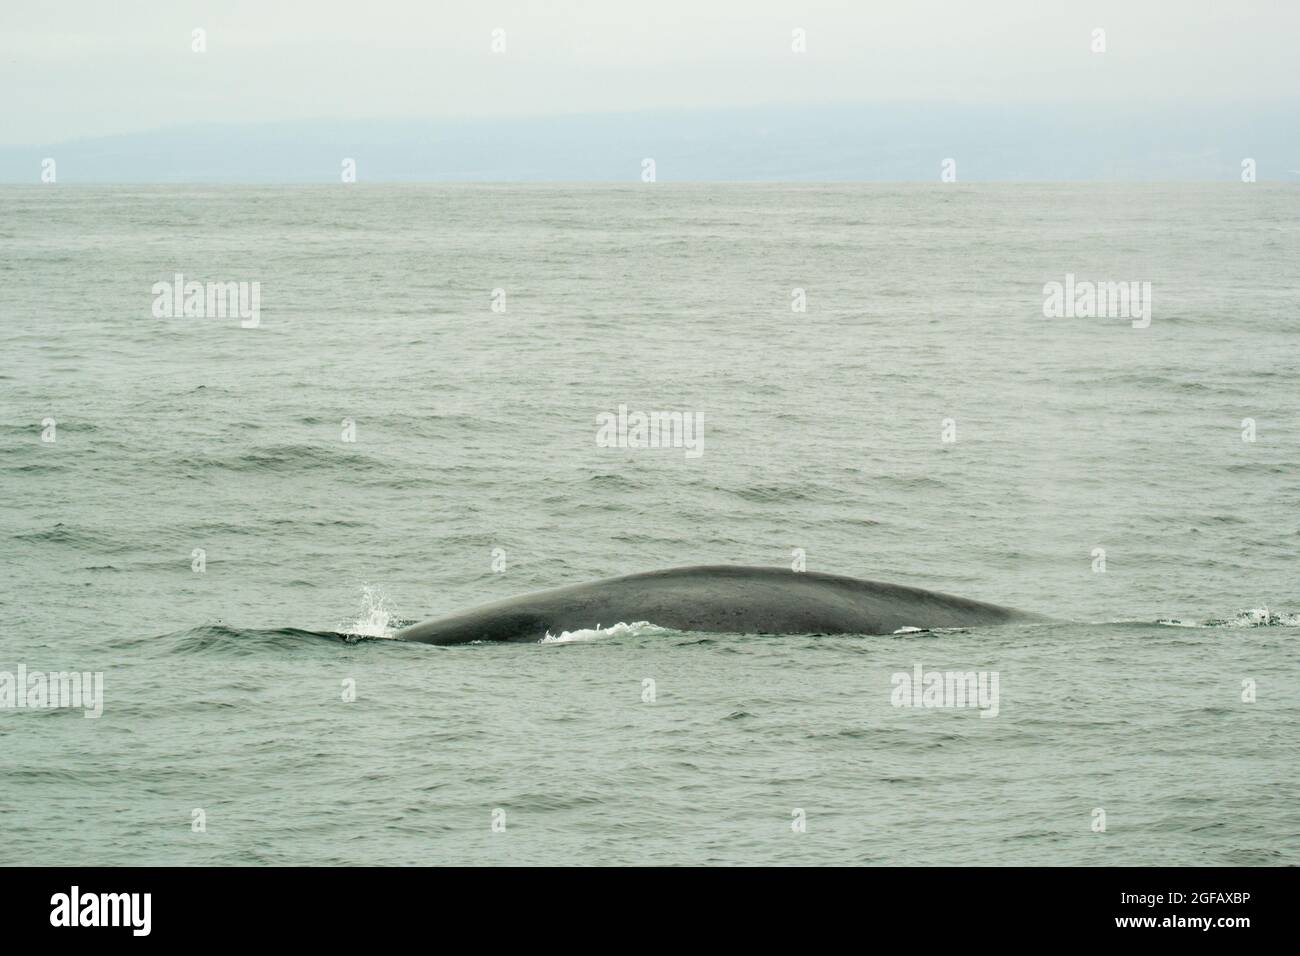 Hump of a wild humpback whale swimming in the Pacific Ocean in Monterey Bay, California, in August. Overcast day, gray skies and sea. Stock Photo